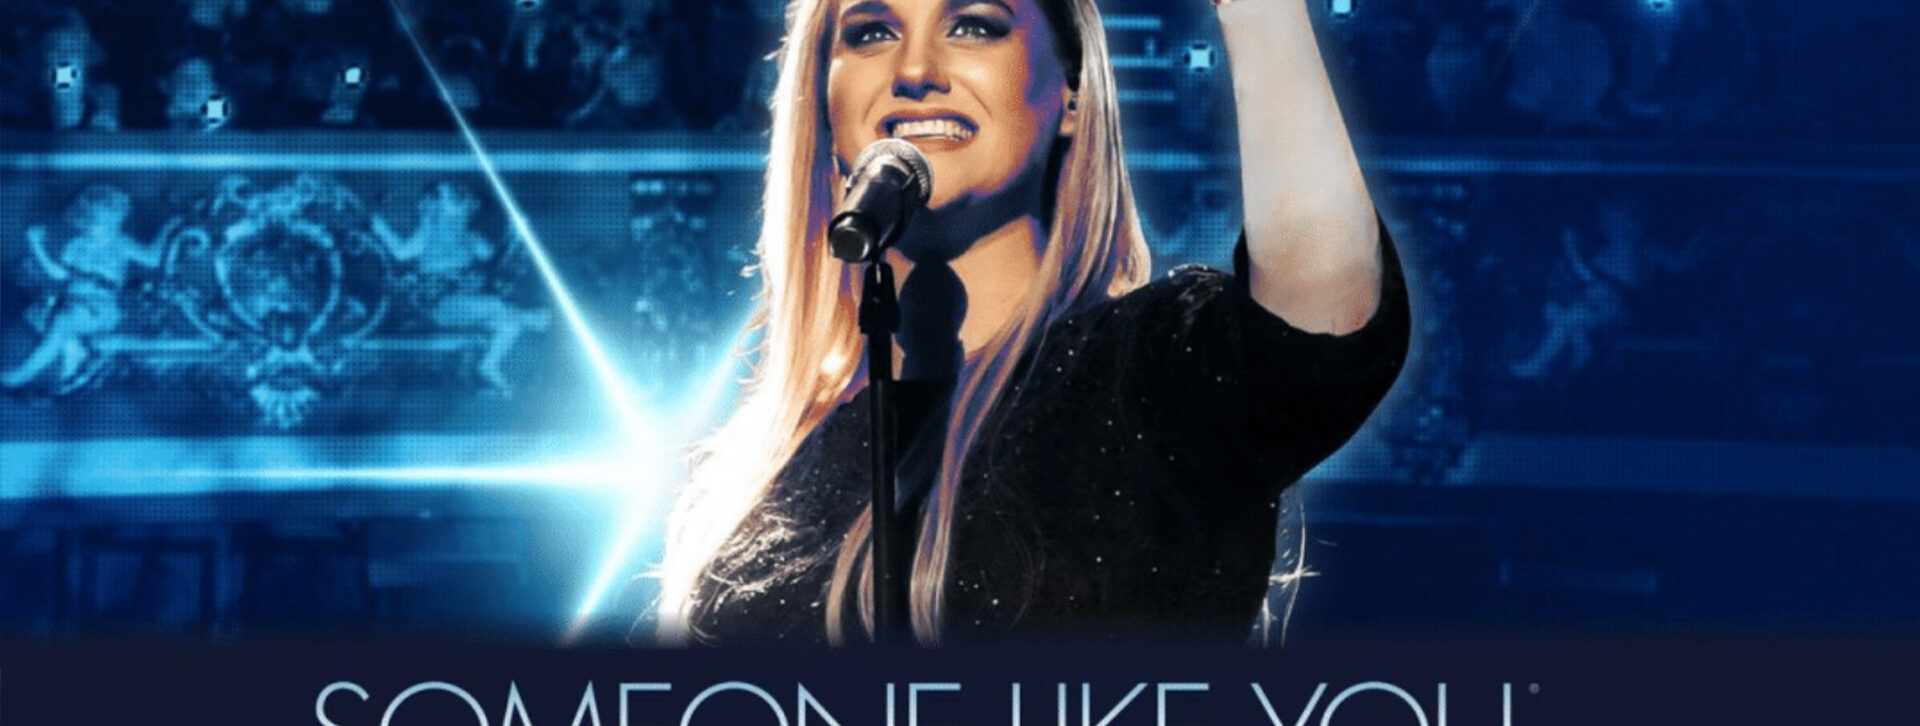 Someone Like You: The Adele Songbook